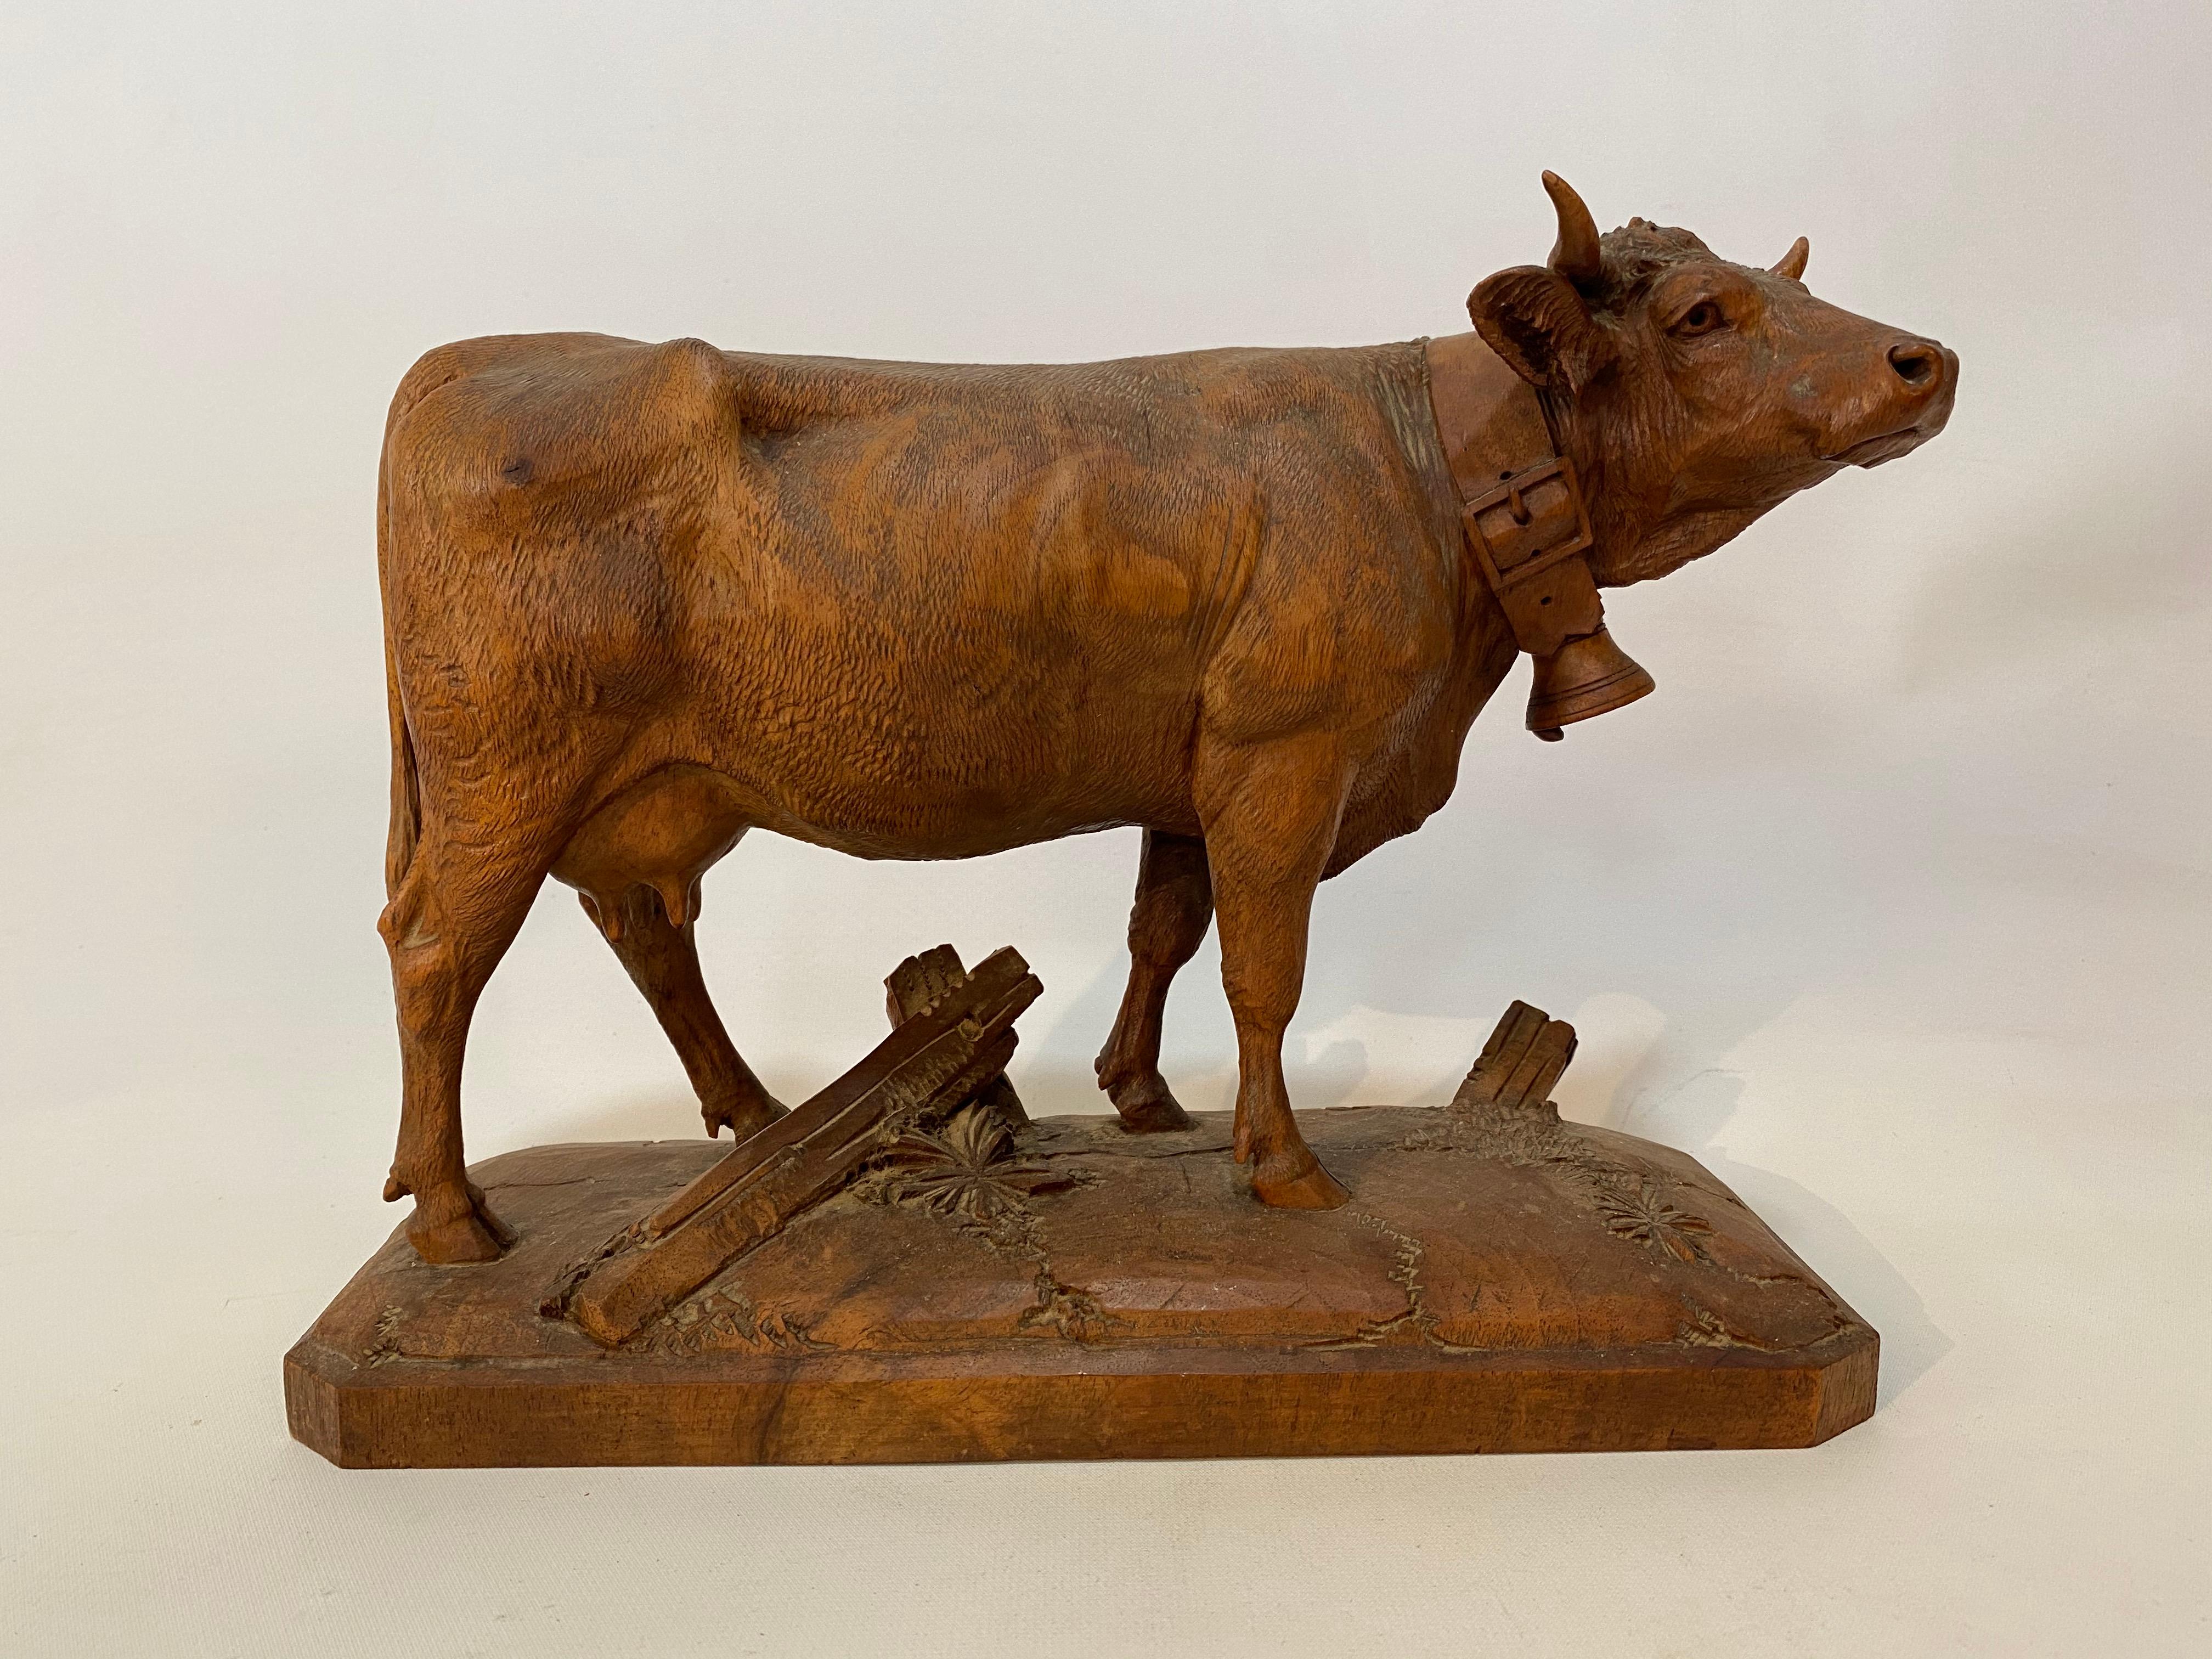 Exquisitely detailed Black Forest carved wood cow. A beautiful patina and tactile quality. Labor intensive attention to the structure, line of sinewy musculature and thickness of the coat. Exceptional carving from, most likely, the Black Forest